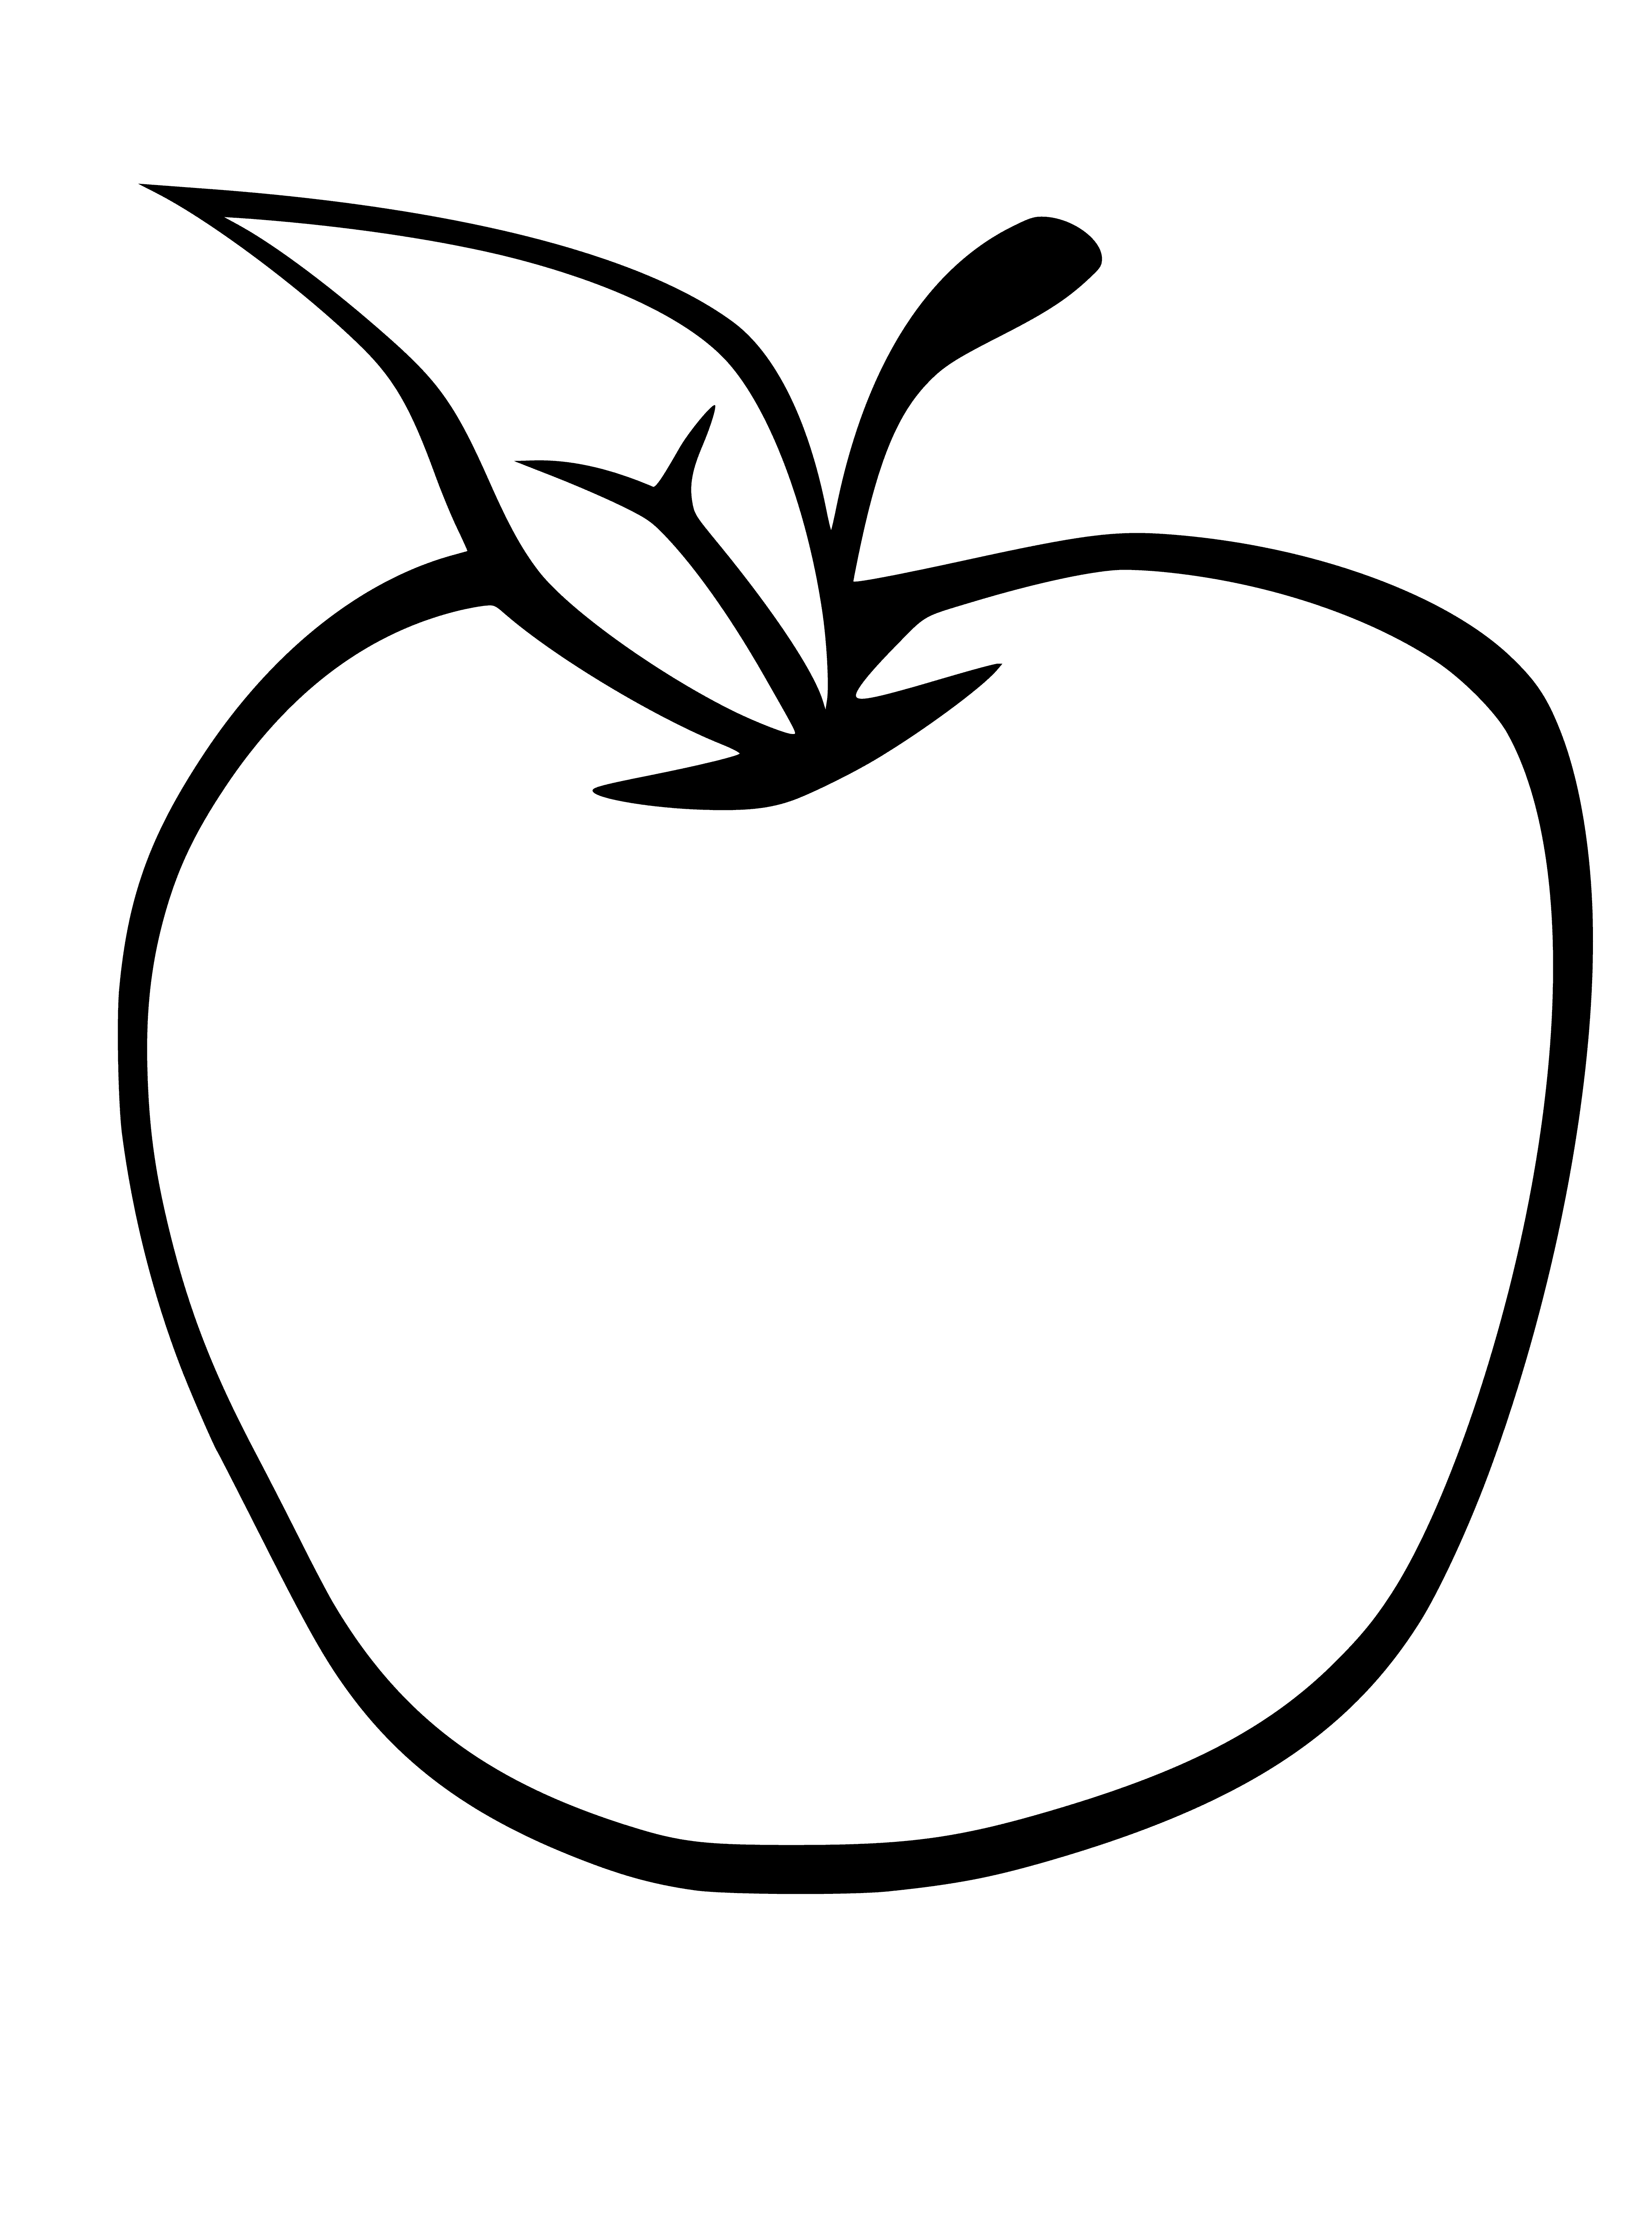 coloring page: An apple with round red and green exterior sits on a hard surface with a small stem coming out of the top.